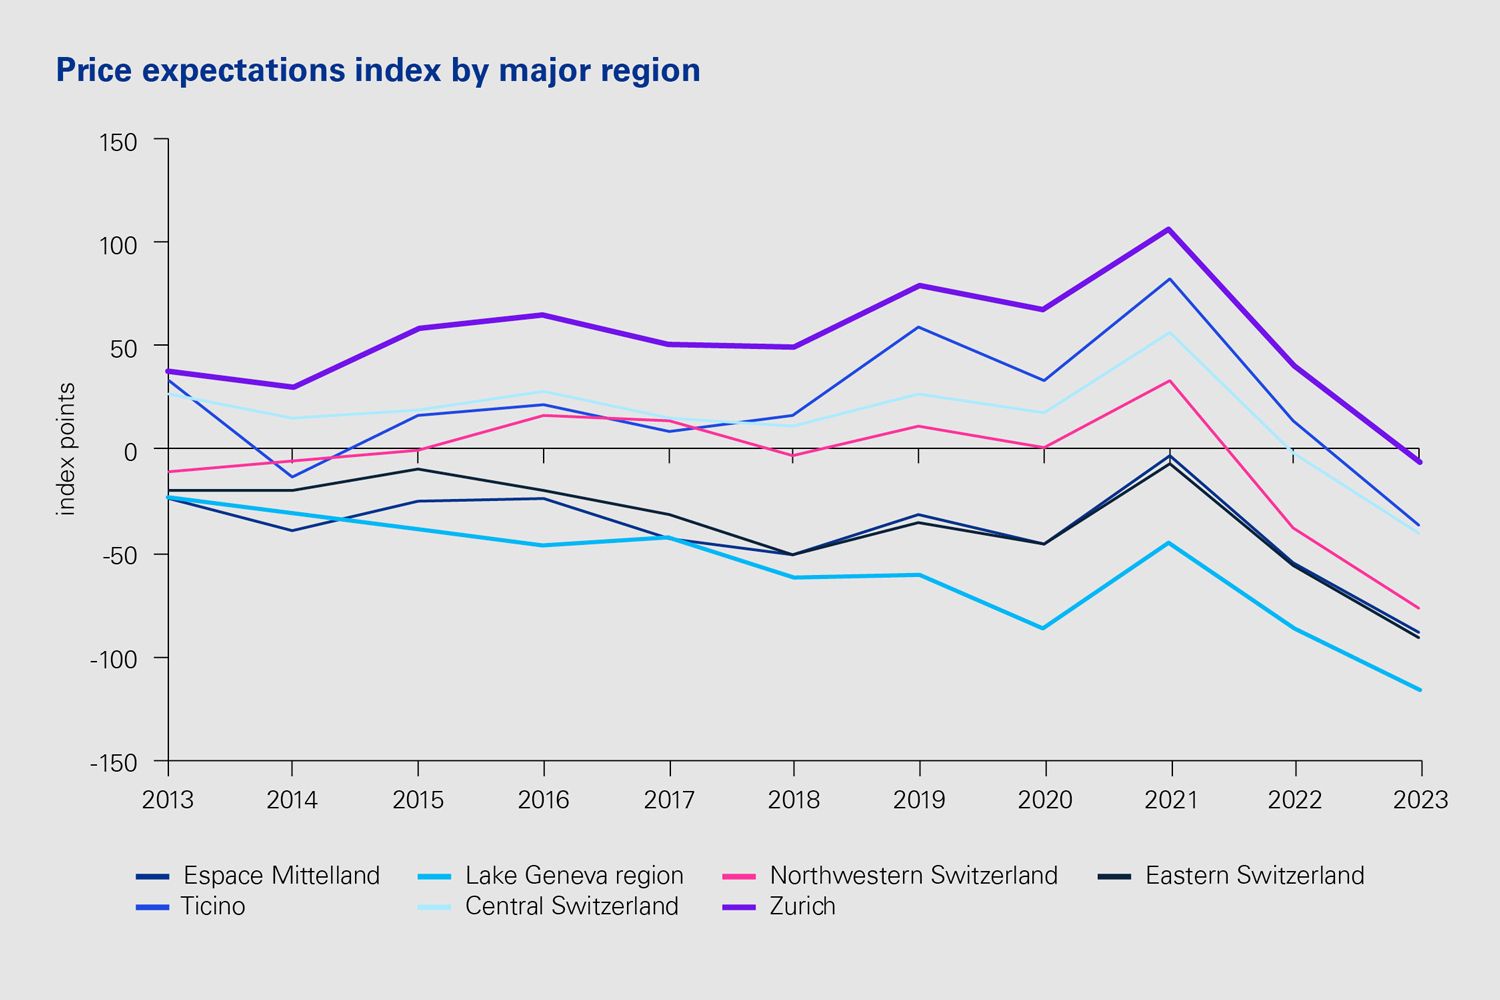 Graphic: Price expectations index by major region